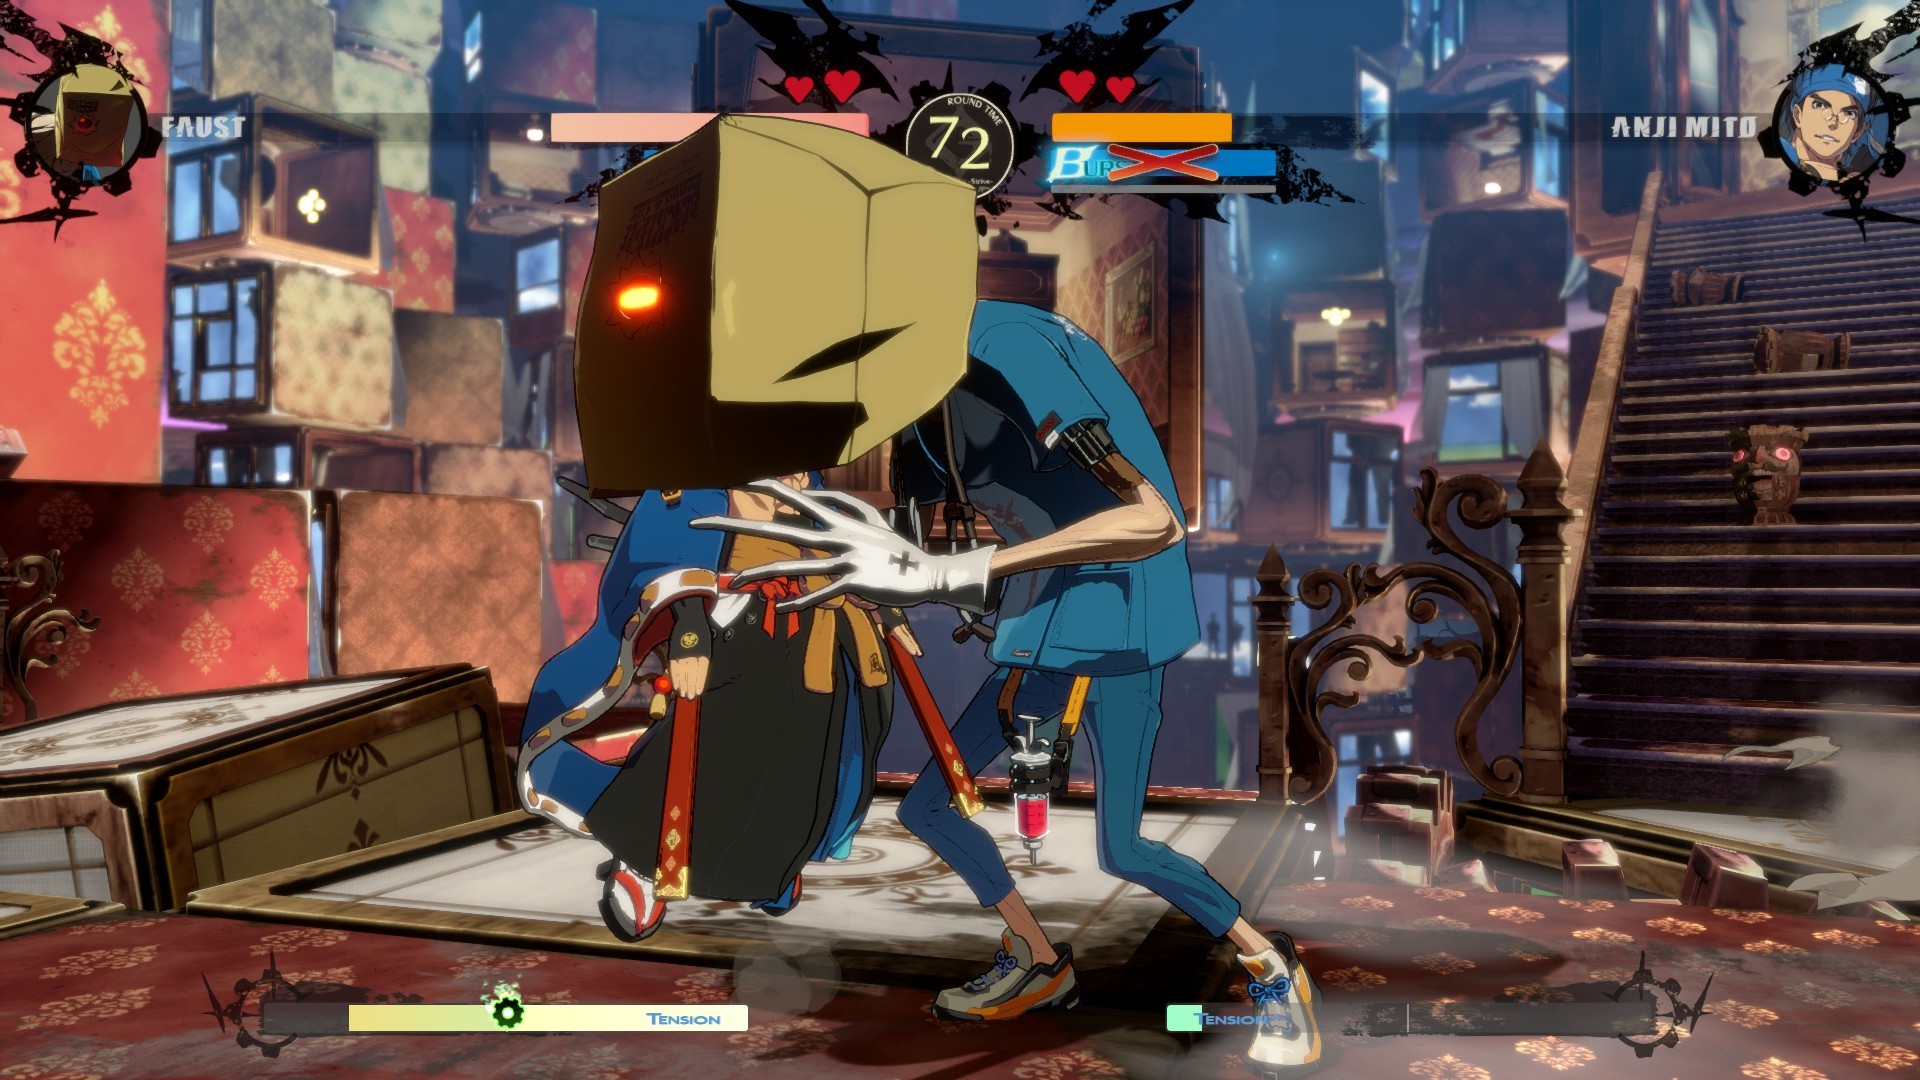 Beginner's Tips And Tricks For Playing As Bridget In Guilty Gear Strive